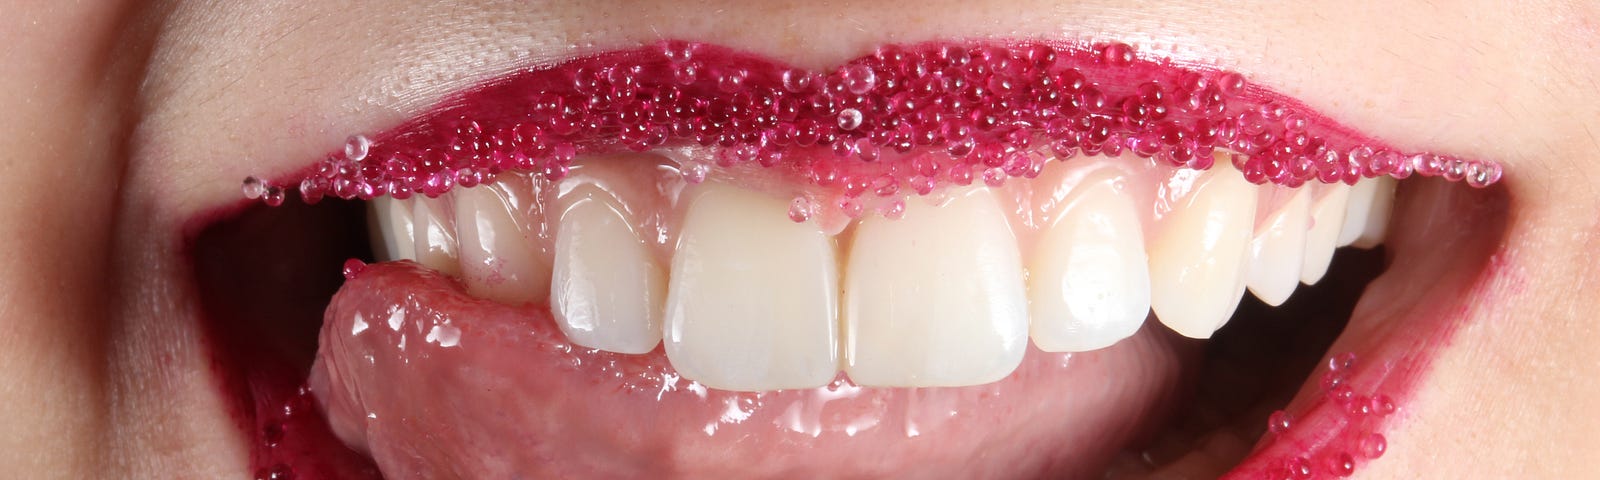 pink sparkly lipstick on just a mouth with a tongue to the side